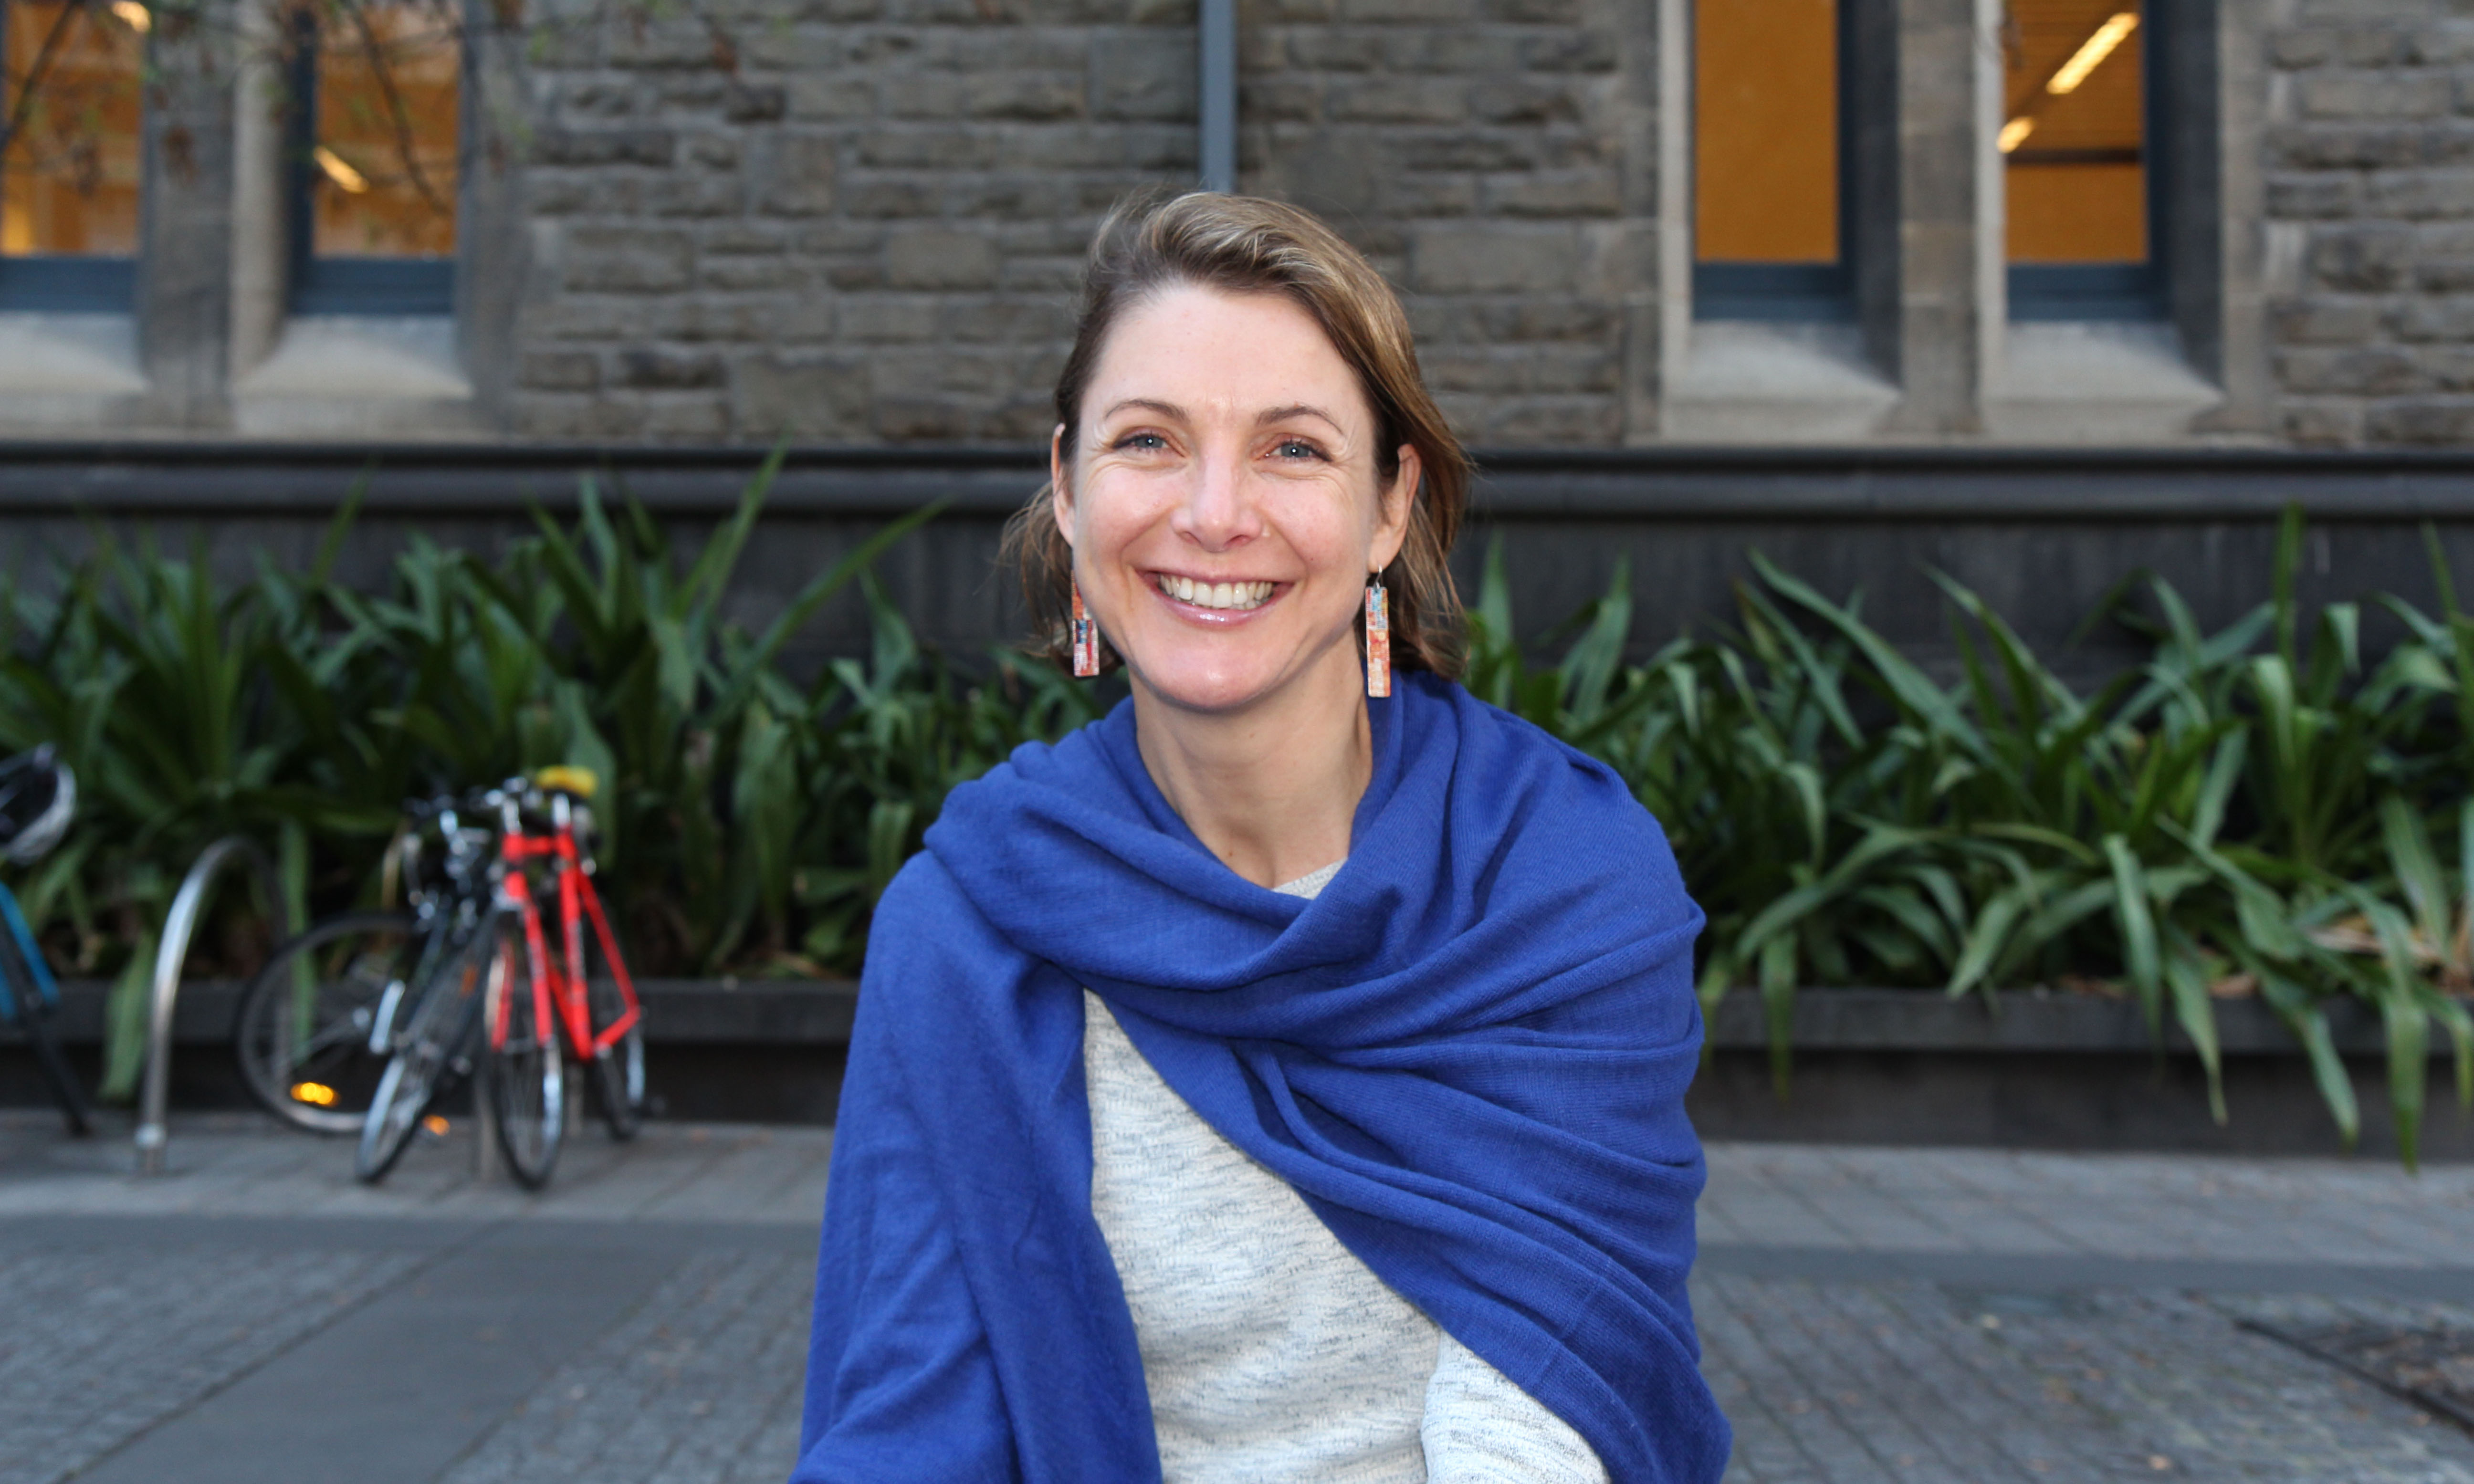 Lauren Rickards is the new interim Urban Futures ECP Director and is focussed on social elements of environmental issues, including climate change.